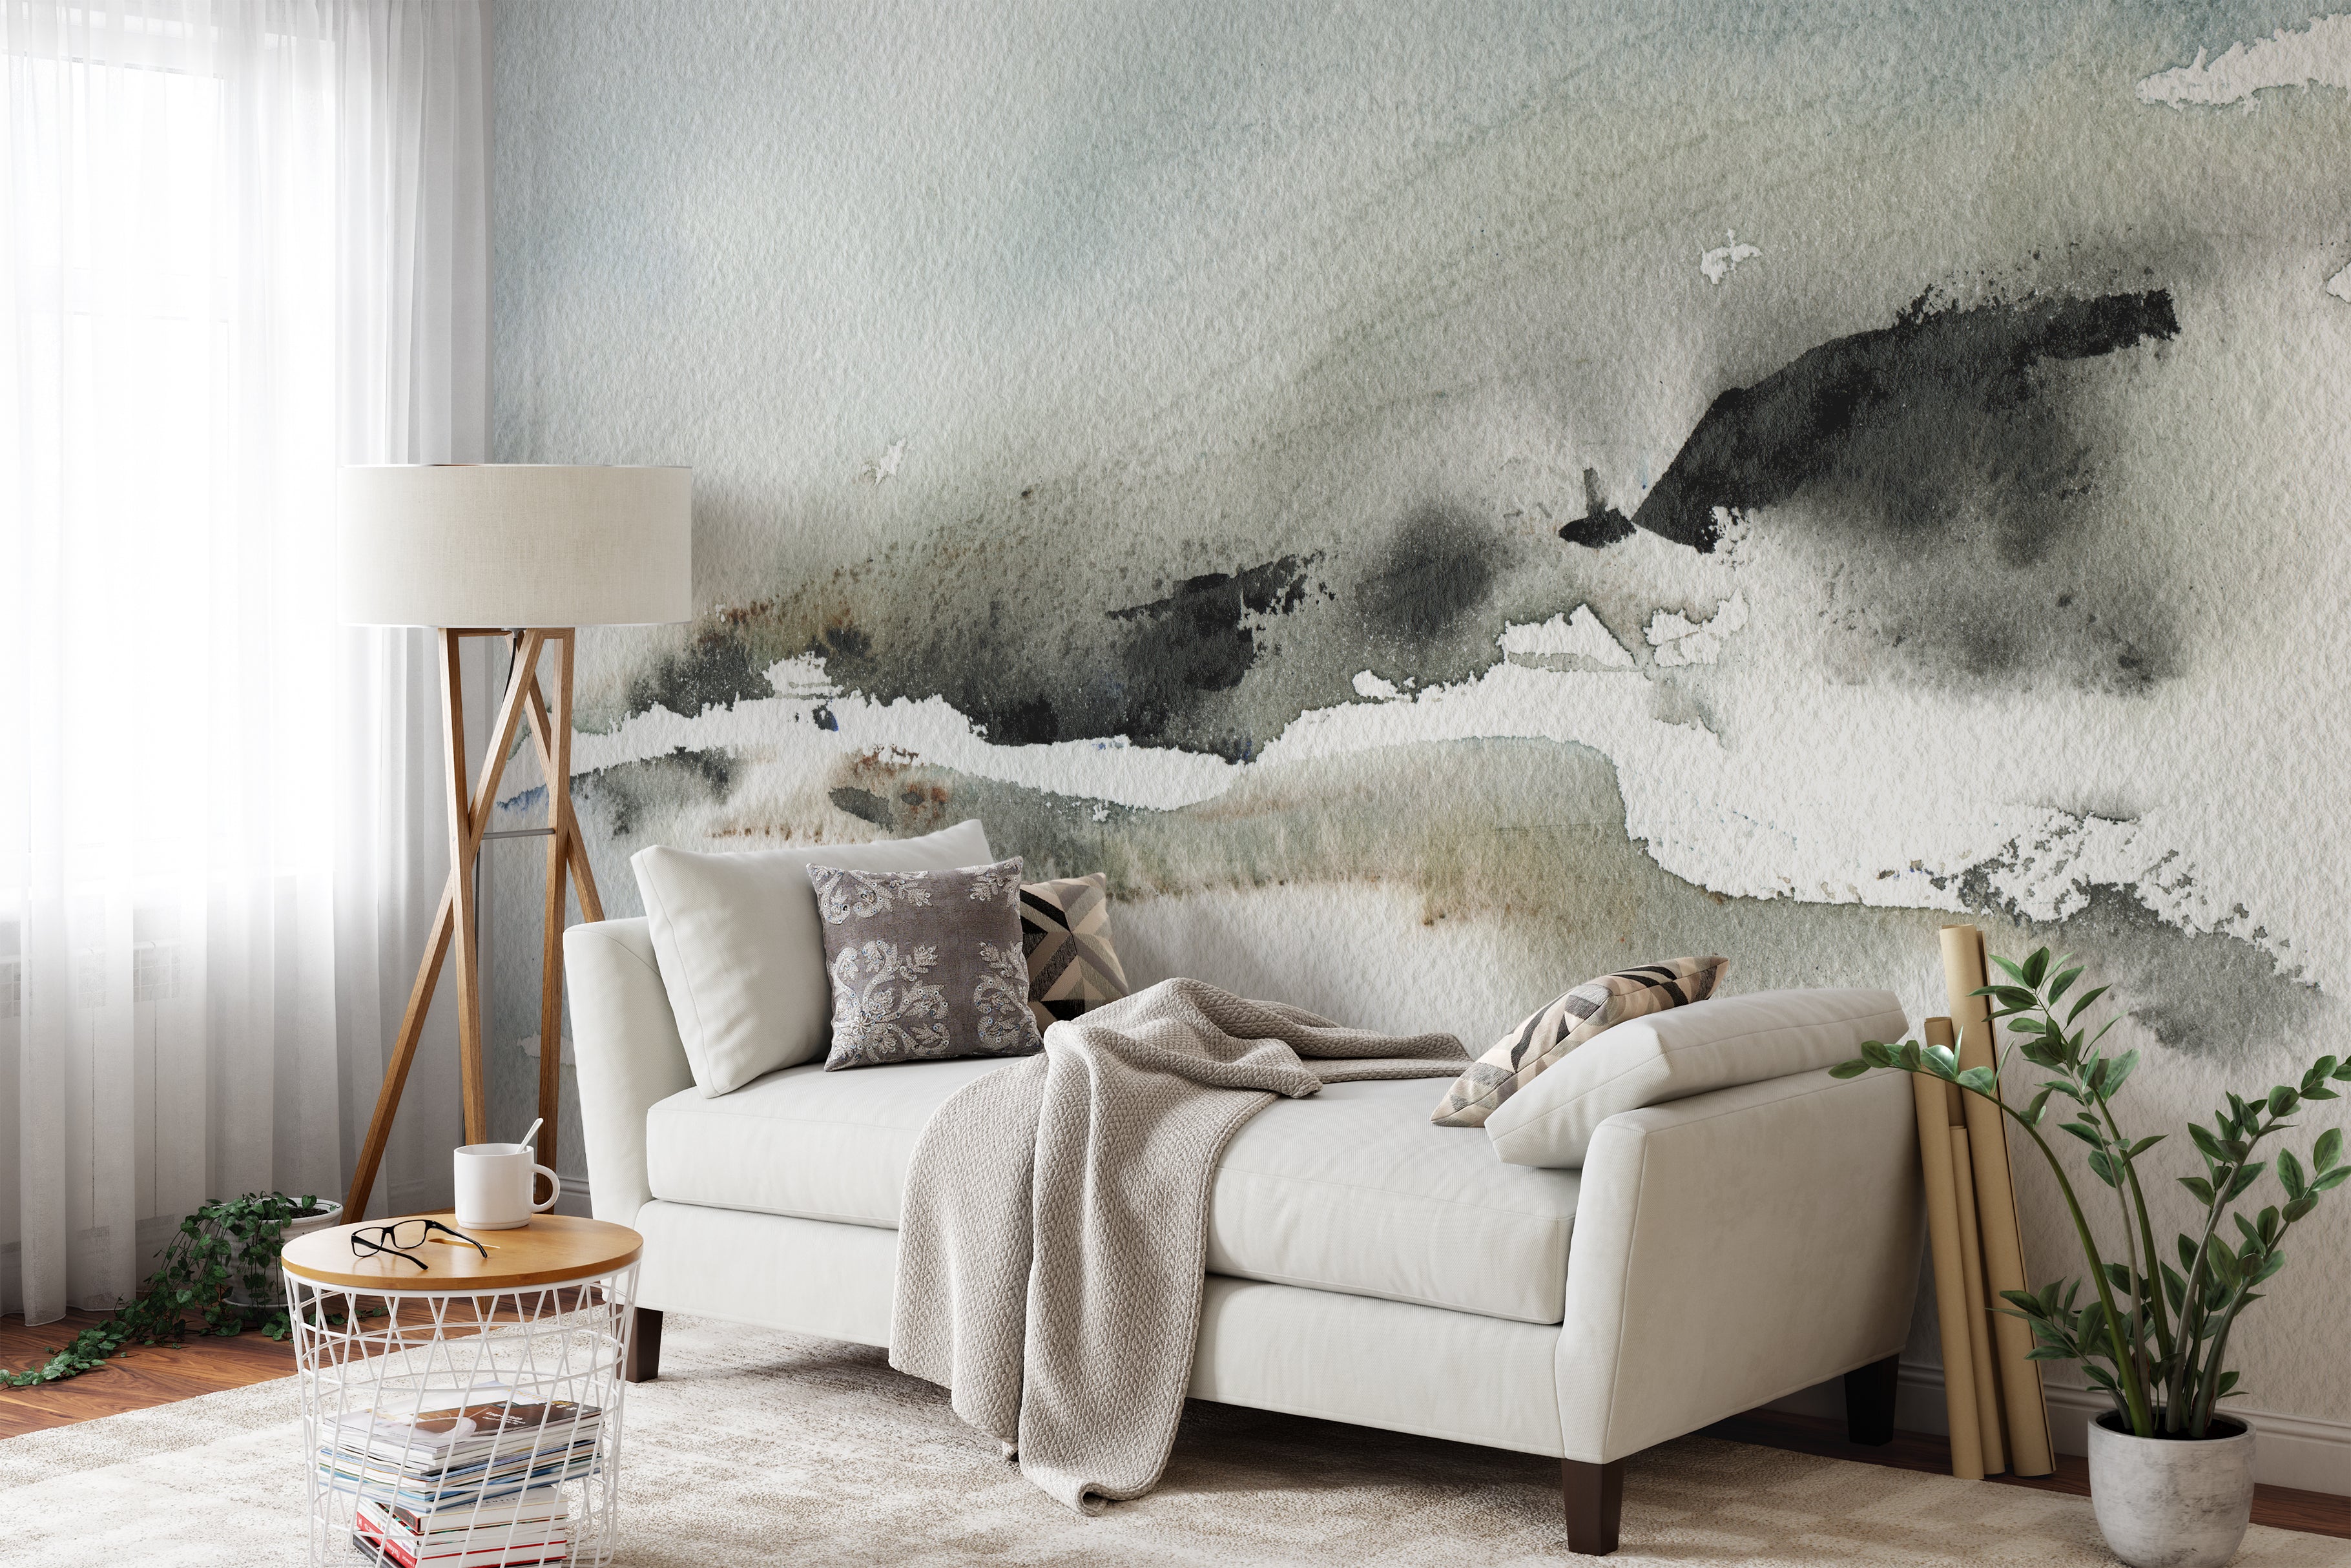 A spacious living room featuring the expansive "Atmospheric Abstraction" wall mural behind a plush beige sofa. The gentle, sweeping brush strokes of the mural in grey and white provide a serene backdrop, complemented by natural wood accents and soft textiles, creating a cozy and inviting environment.